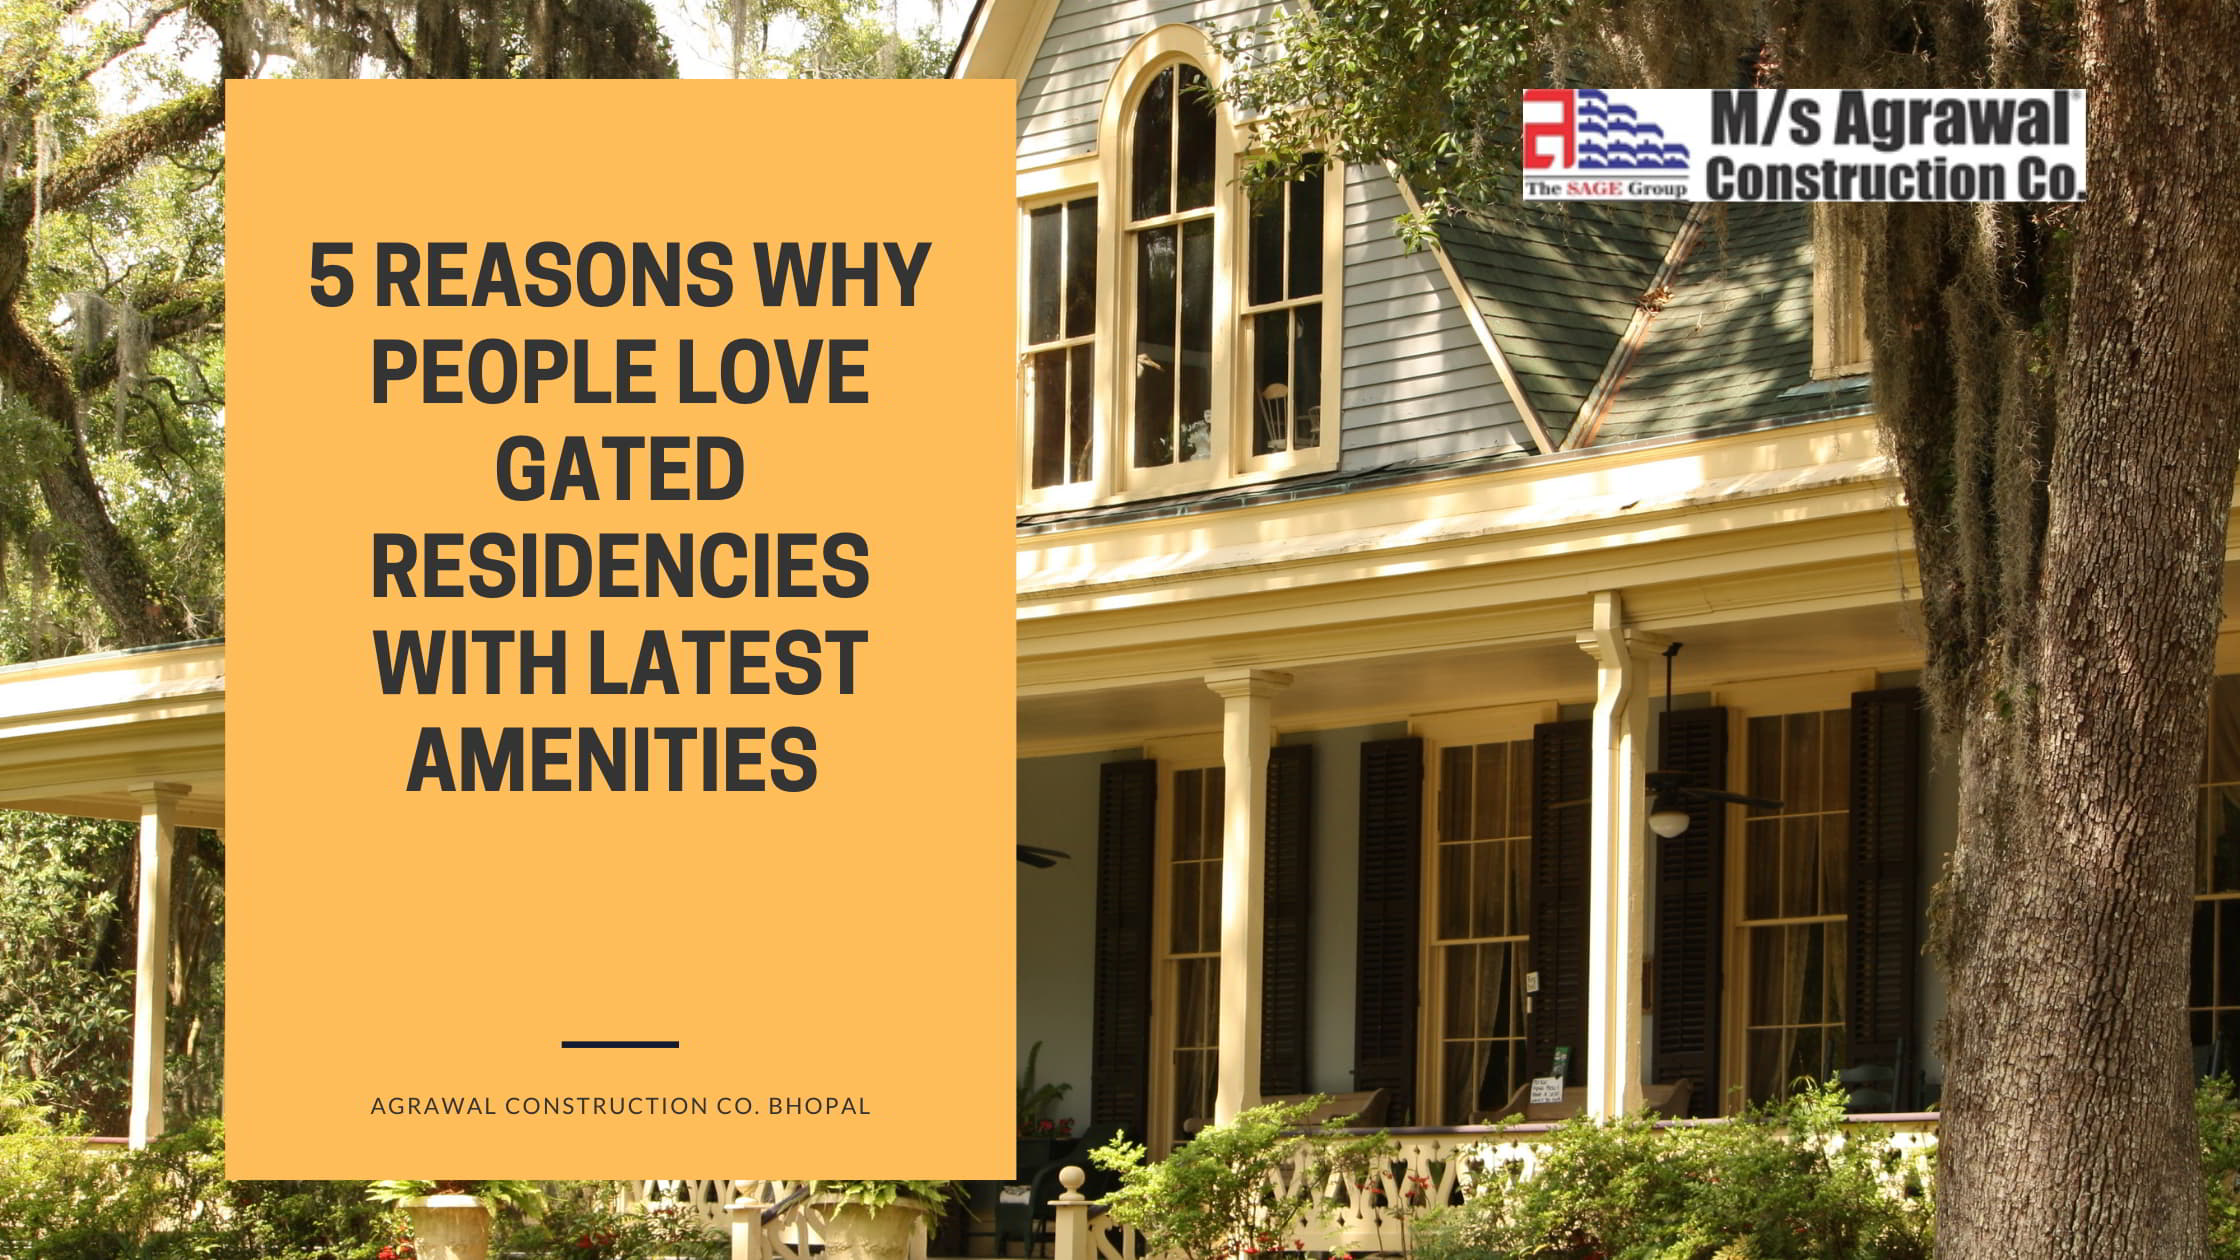 5 Reasons Why People Love Gated Residencies With Latest Amenities 